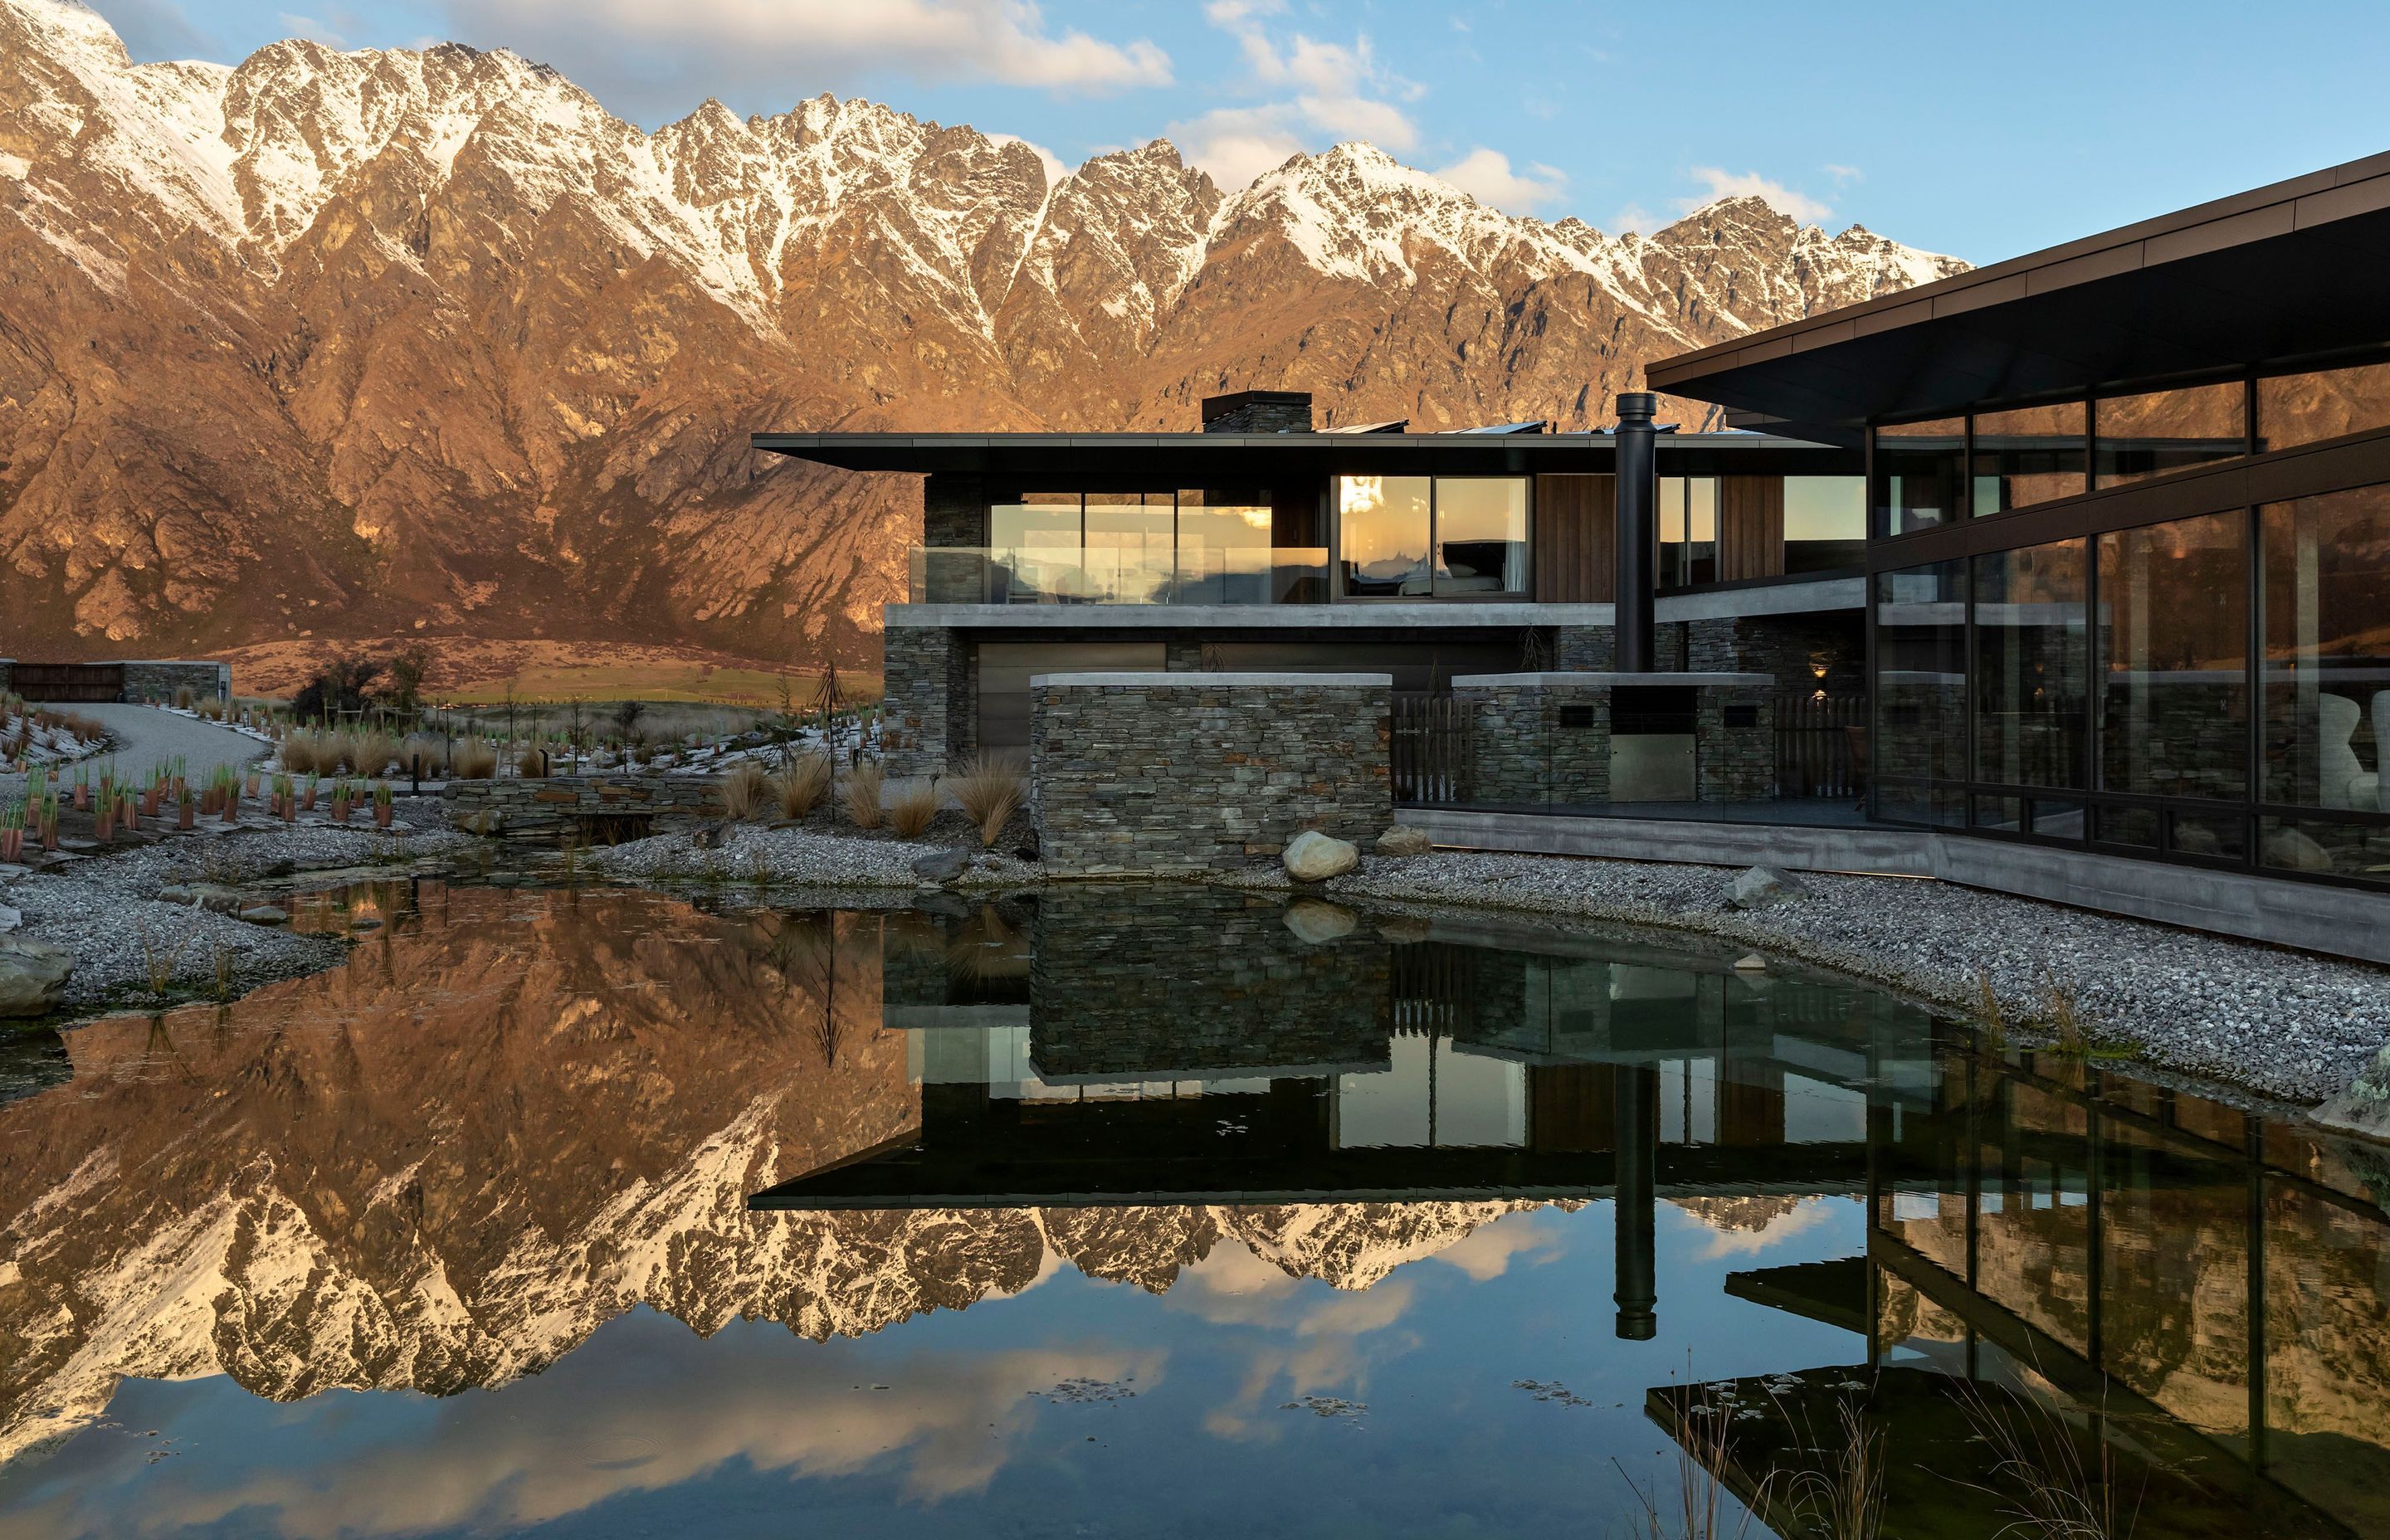 A view from the reflection pool of Hidden Island Retreat and the surrounding mountain ranges.